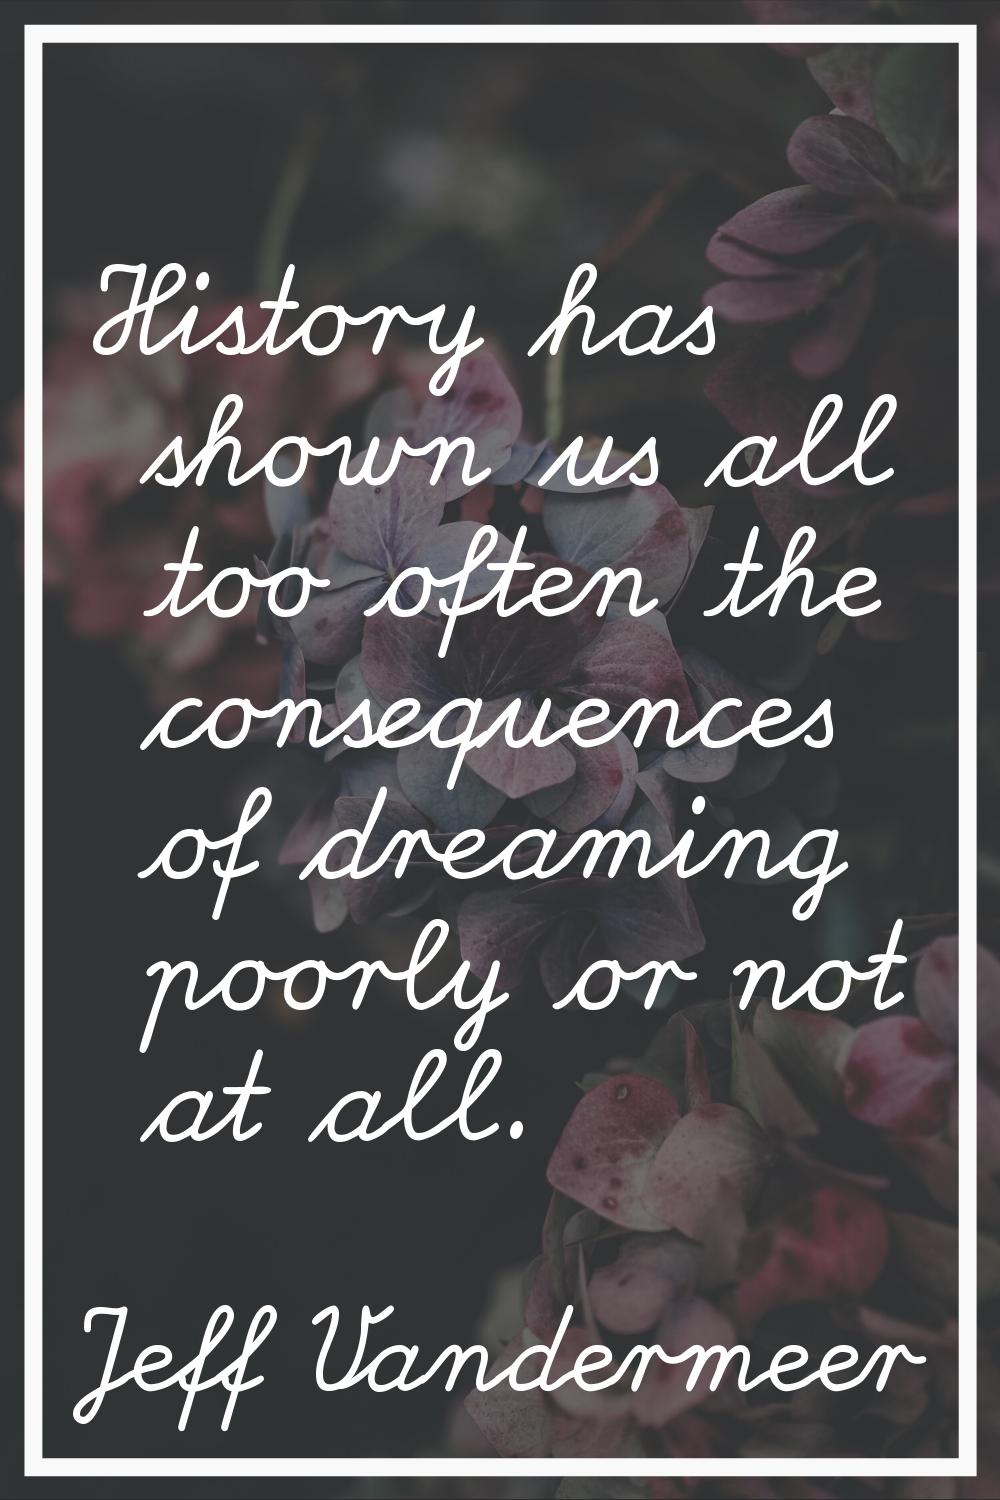 History has shown us all too often the consequences of dreaming poorly or not at all.